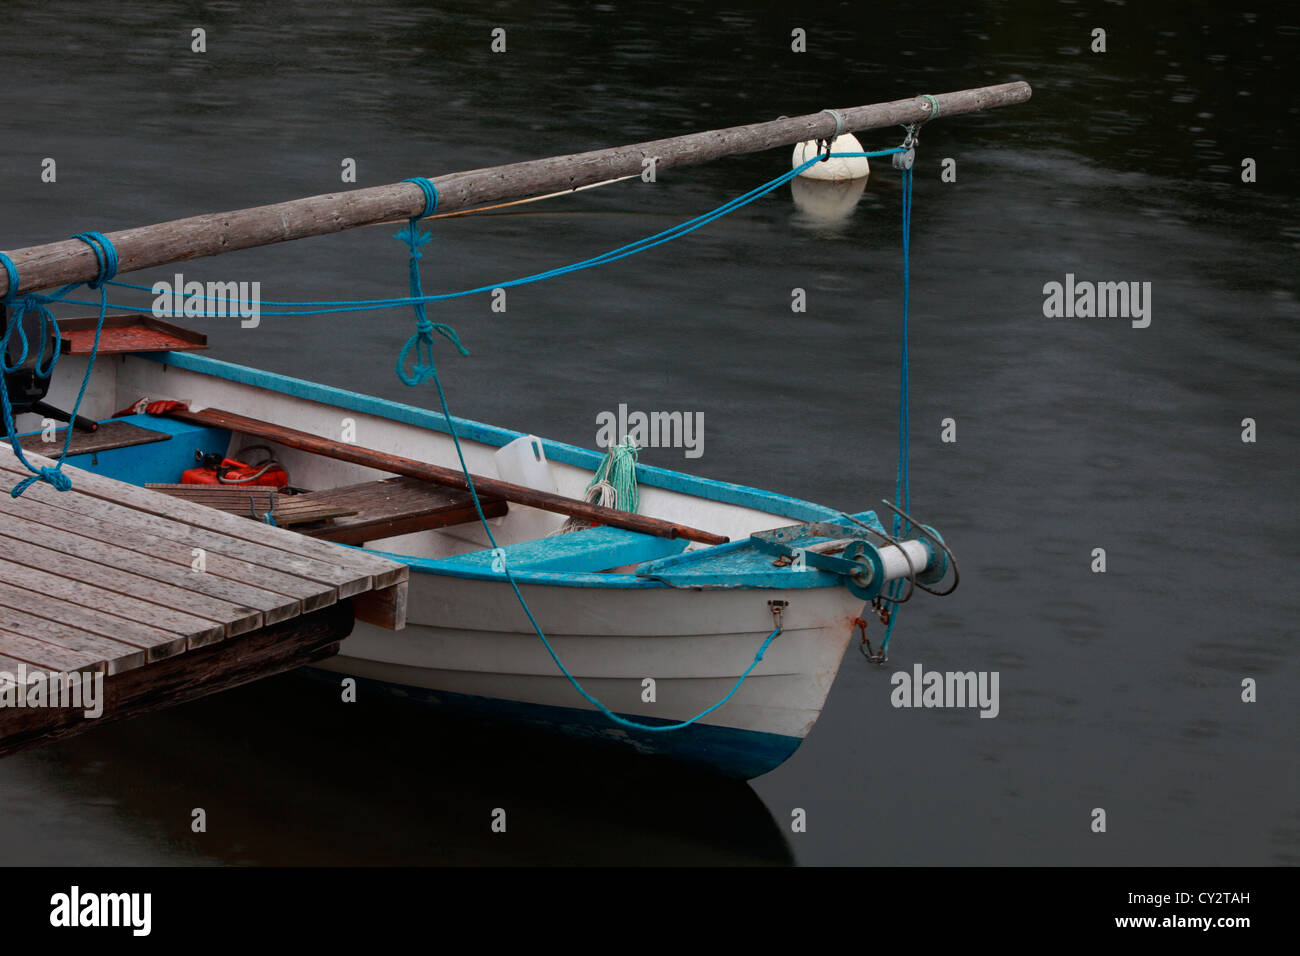 Rowing boat lying moored at a jetty in a fishing village in Sweden Stock Photo